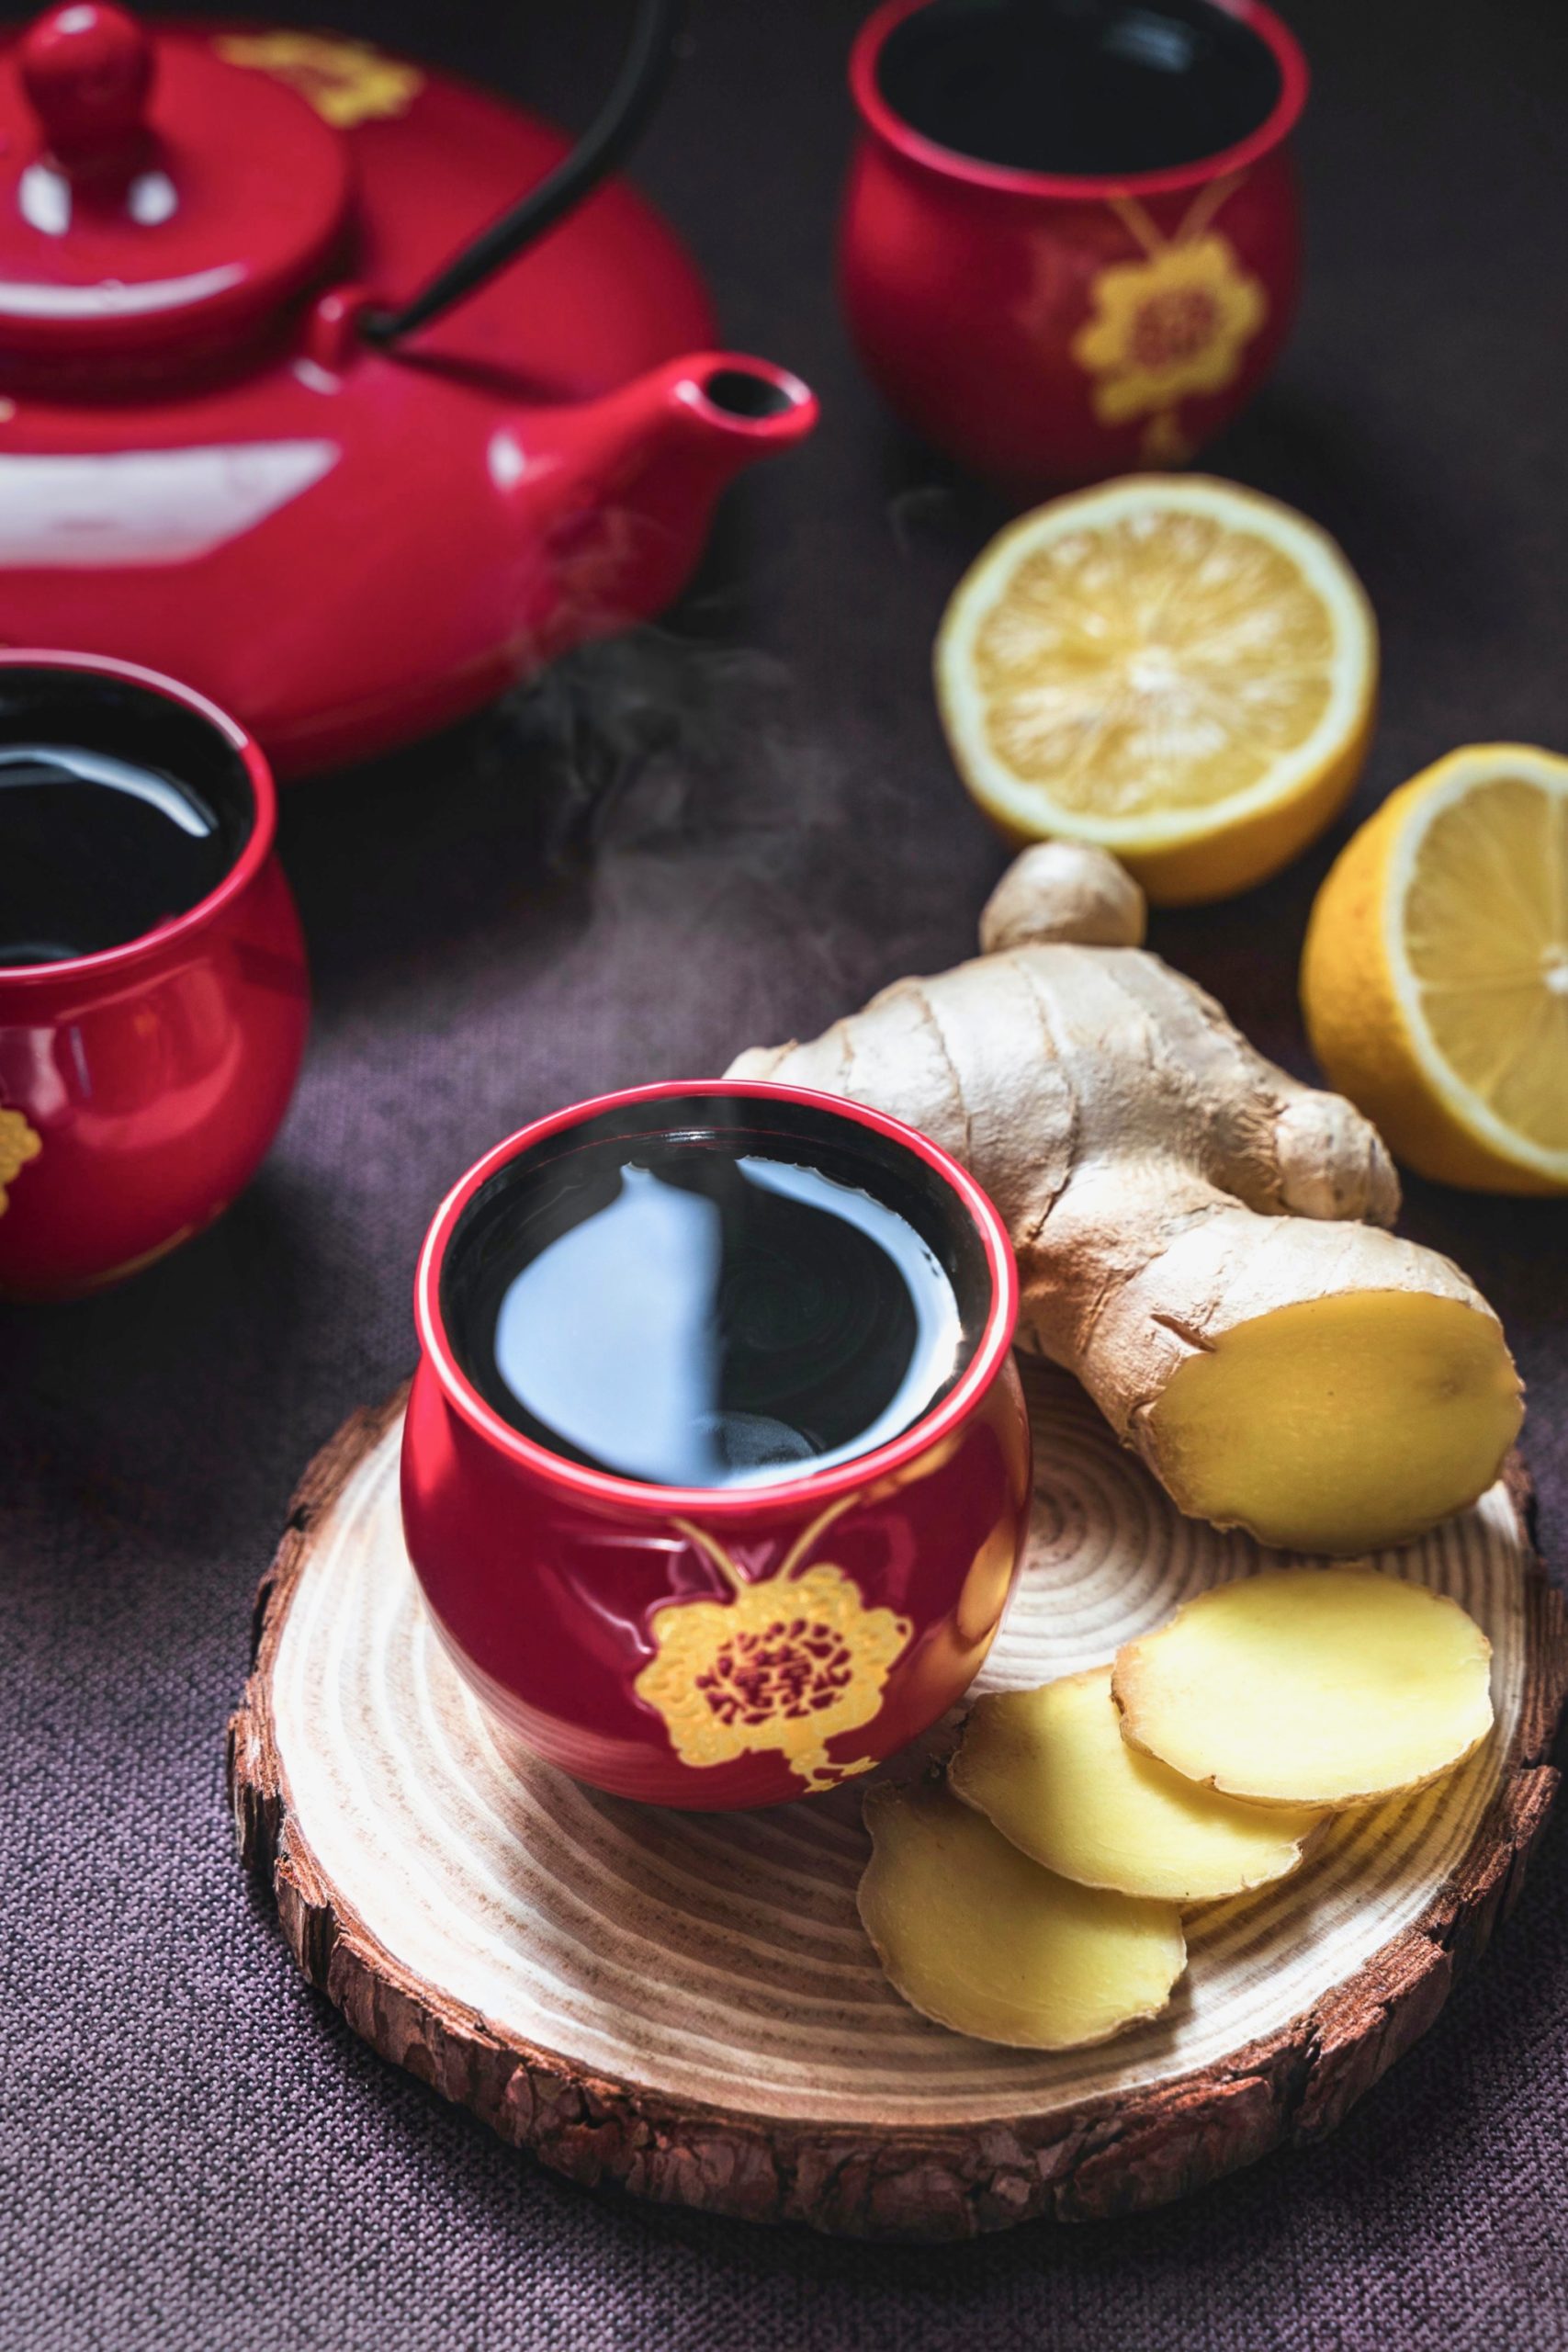 Ginger tea to boost your immune system